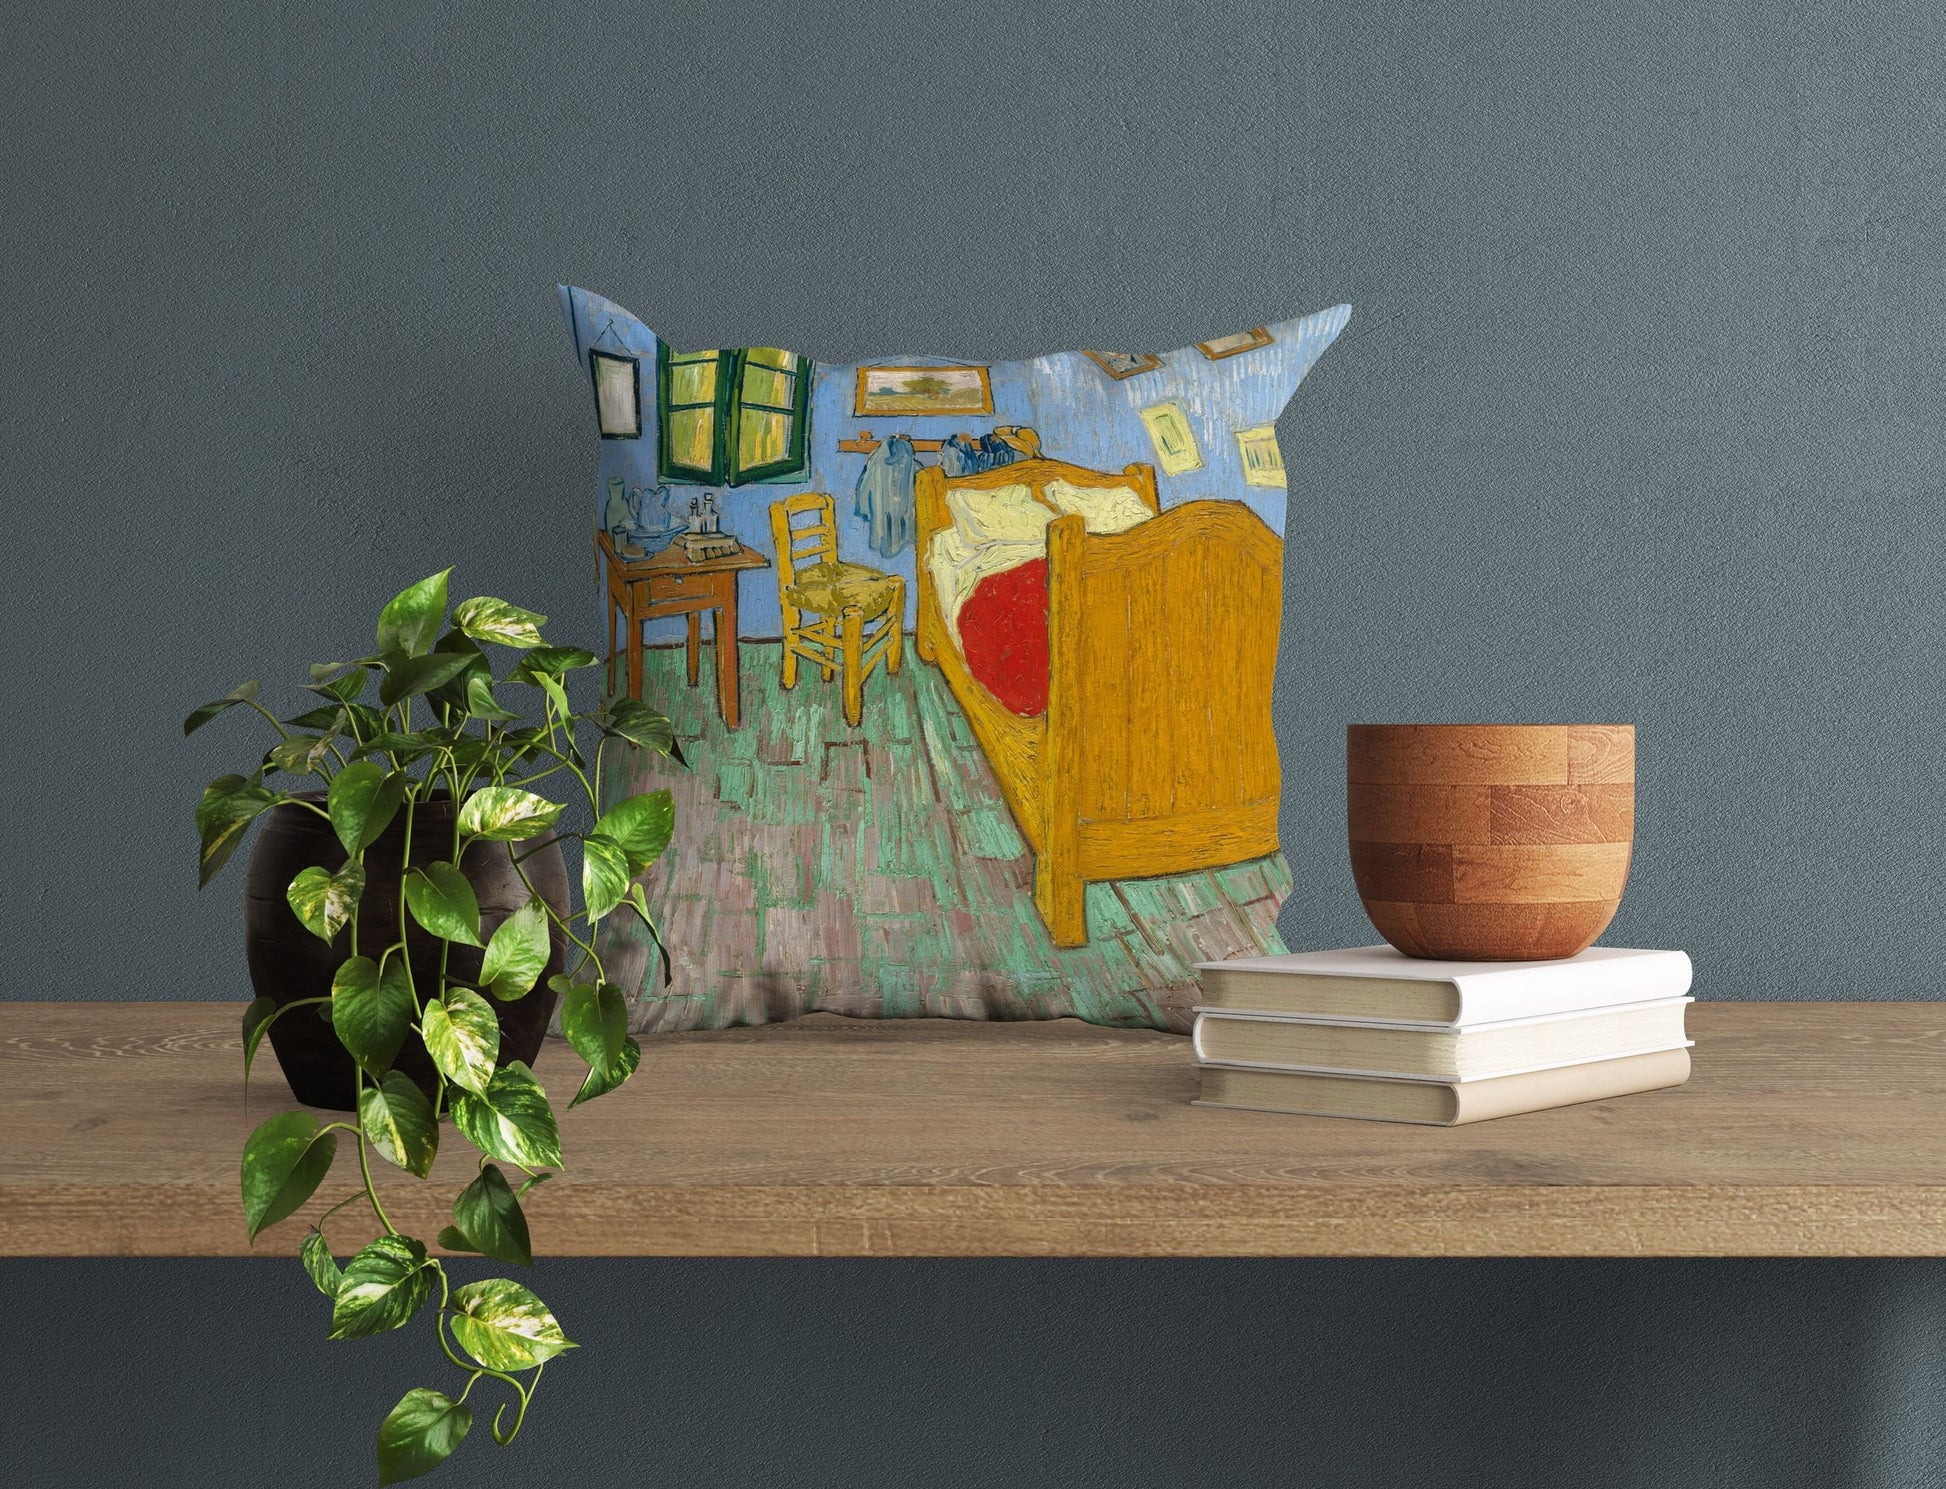 Vincent Van Gogh Famous Painting The Bedroom, Throw Pillow Cover, Abstract Throw Pillow, Designer Pillow, Home Decor Pillow, Farmhouse Decor